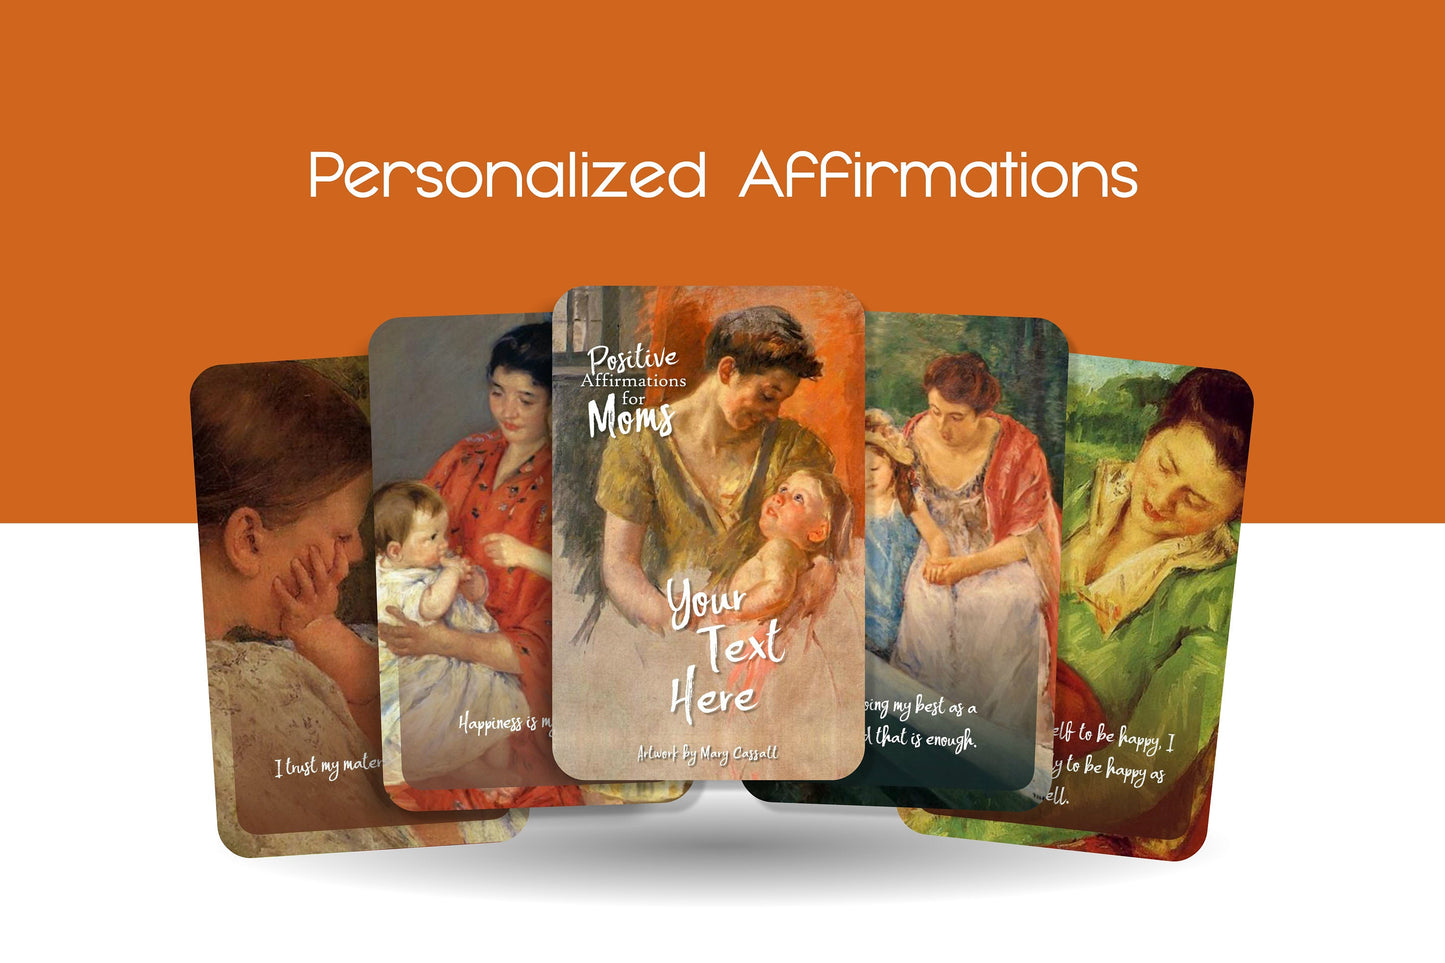 Personalized Affirmations - Positive Affirmations for Moms - Wisdom Cards for Moms